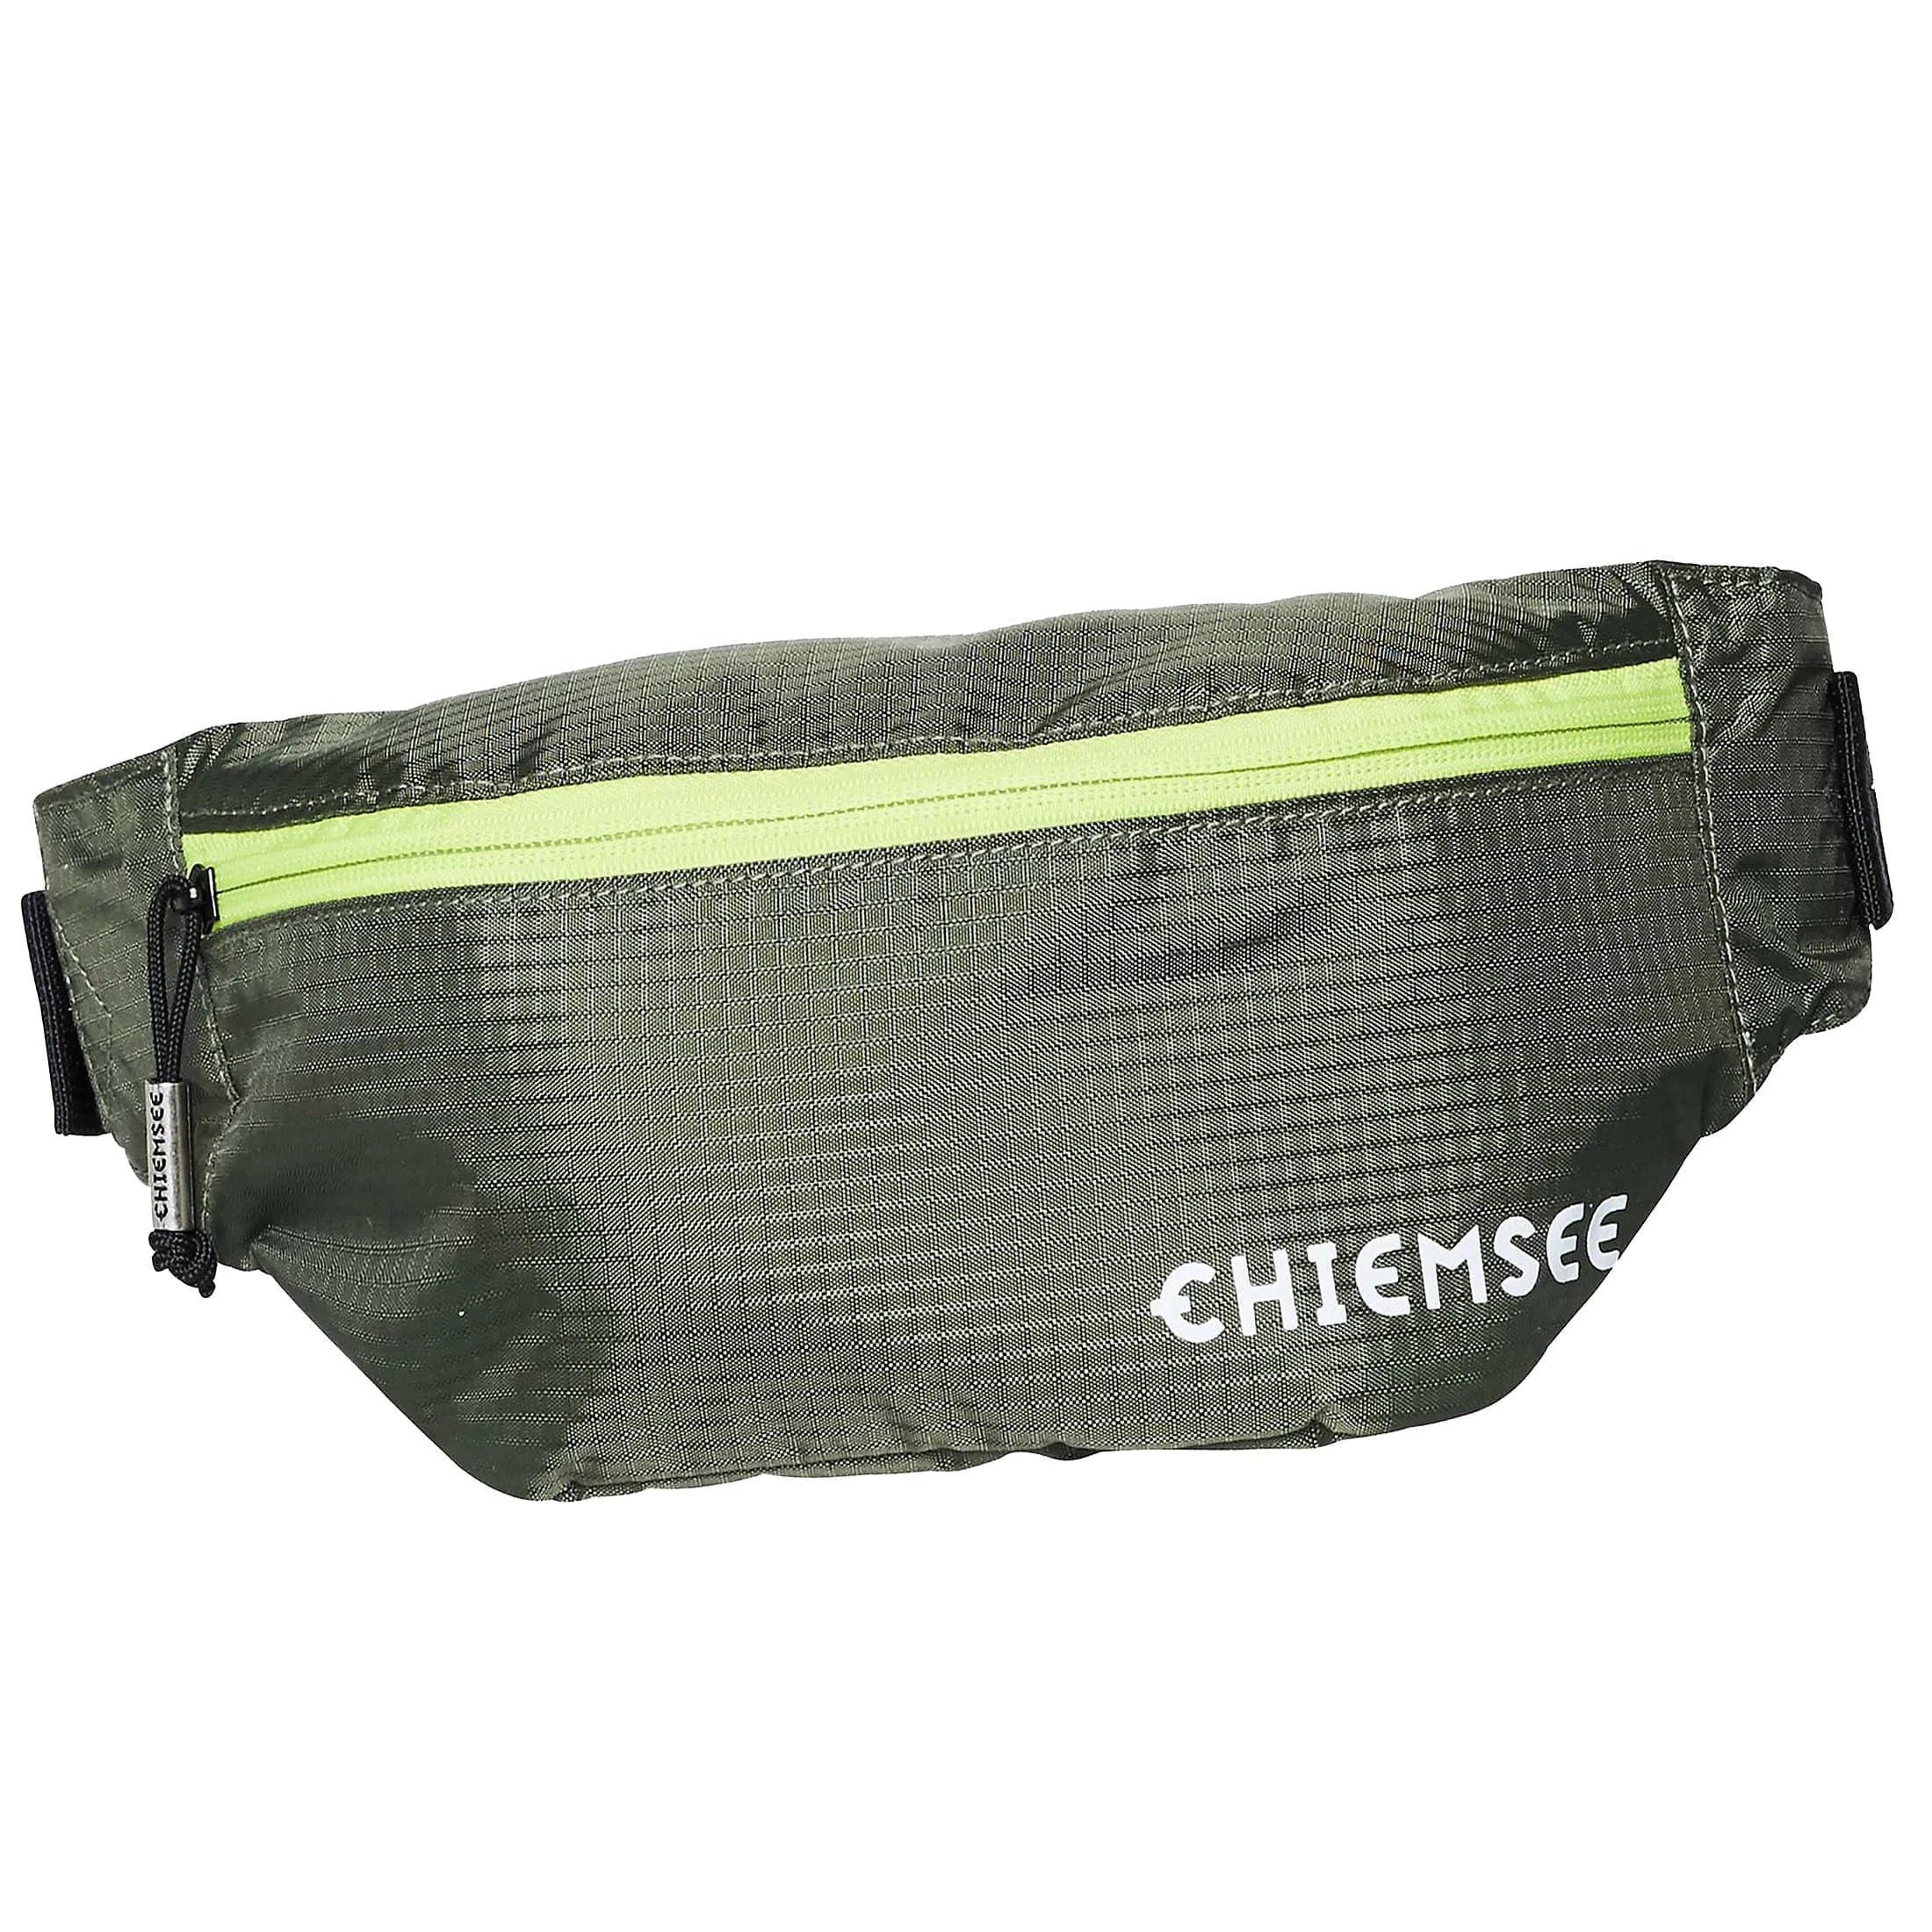 Chiemsee Sports & Travel Bags belt bag 39 cm - dusty olive